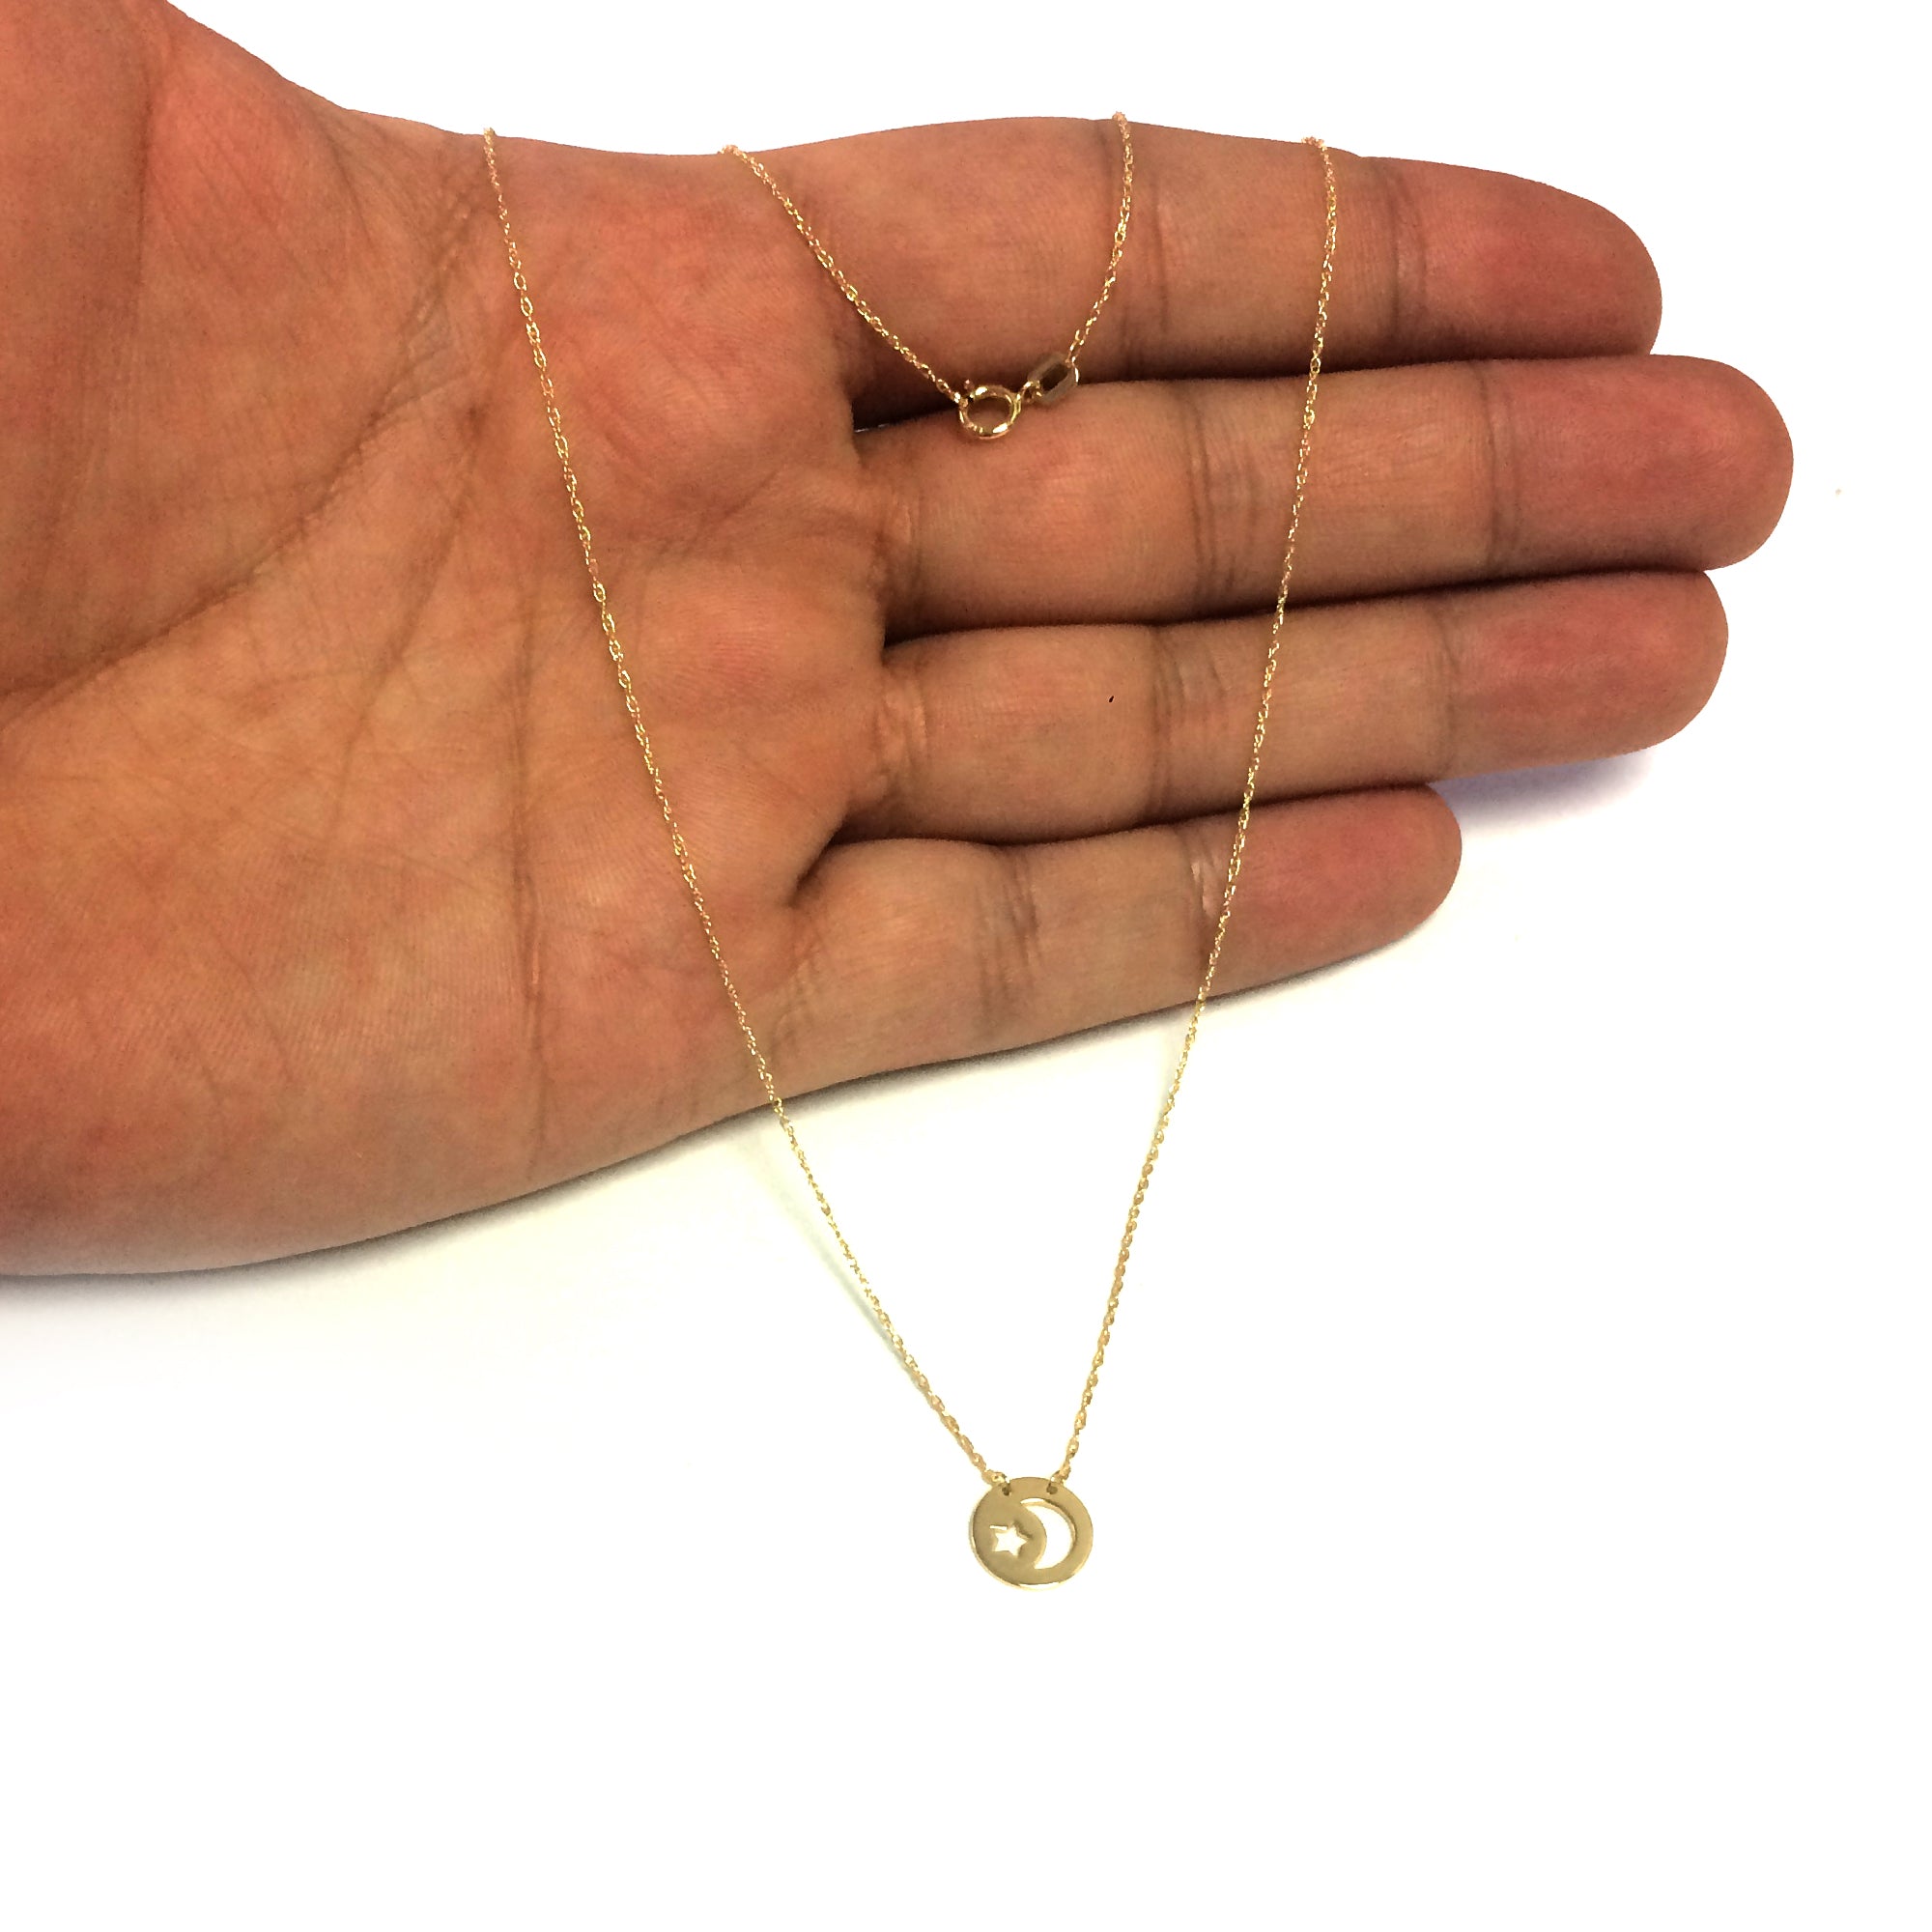 14K Yellow Gold Mini Moon And Star Pendant Necklace, 16 To 18 Inches Adjustable fine designer jewelry for men and women